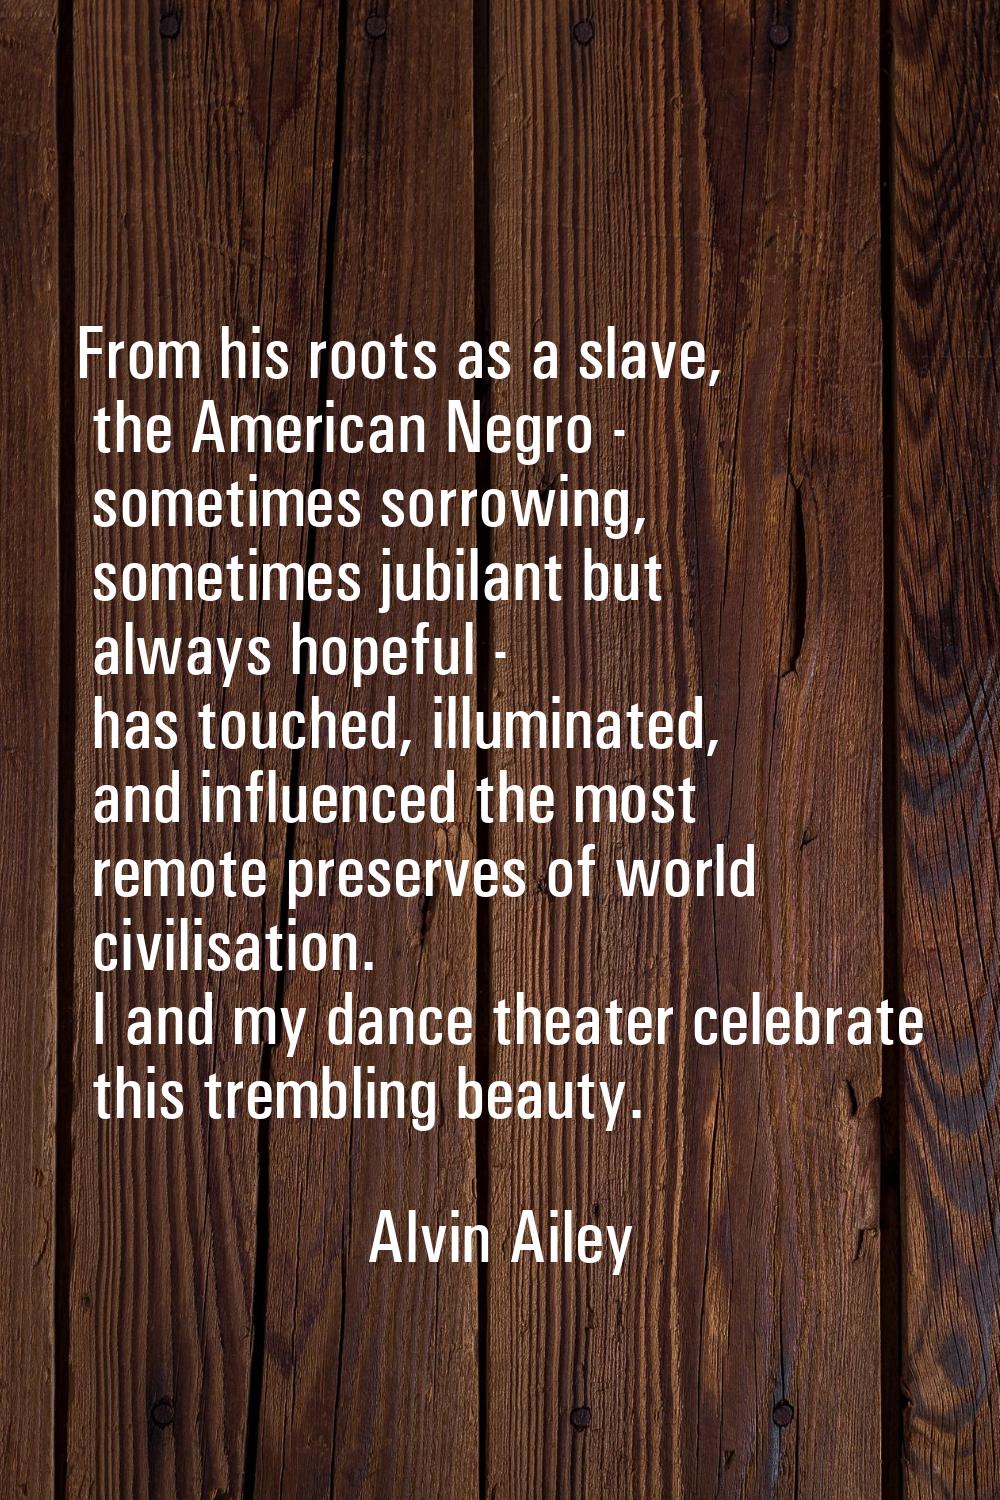 From his roots as a slave, the American Negro - sometimes sorrowing, sometimes jubilant but always 